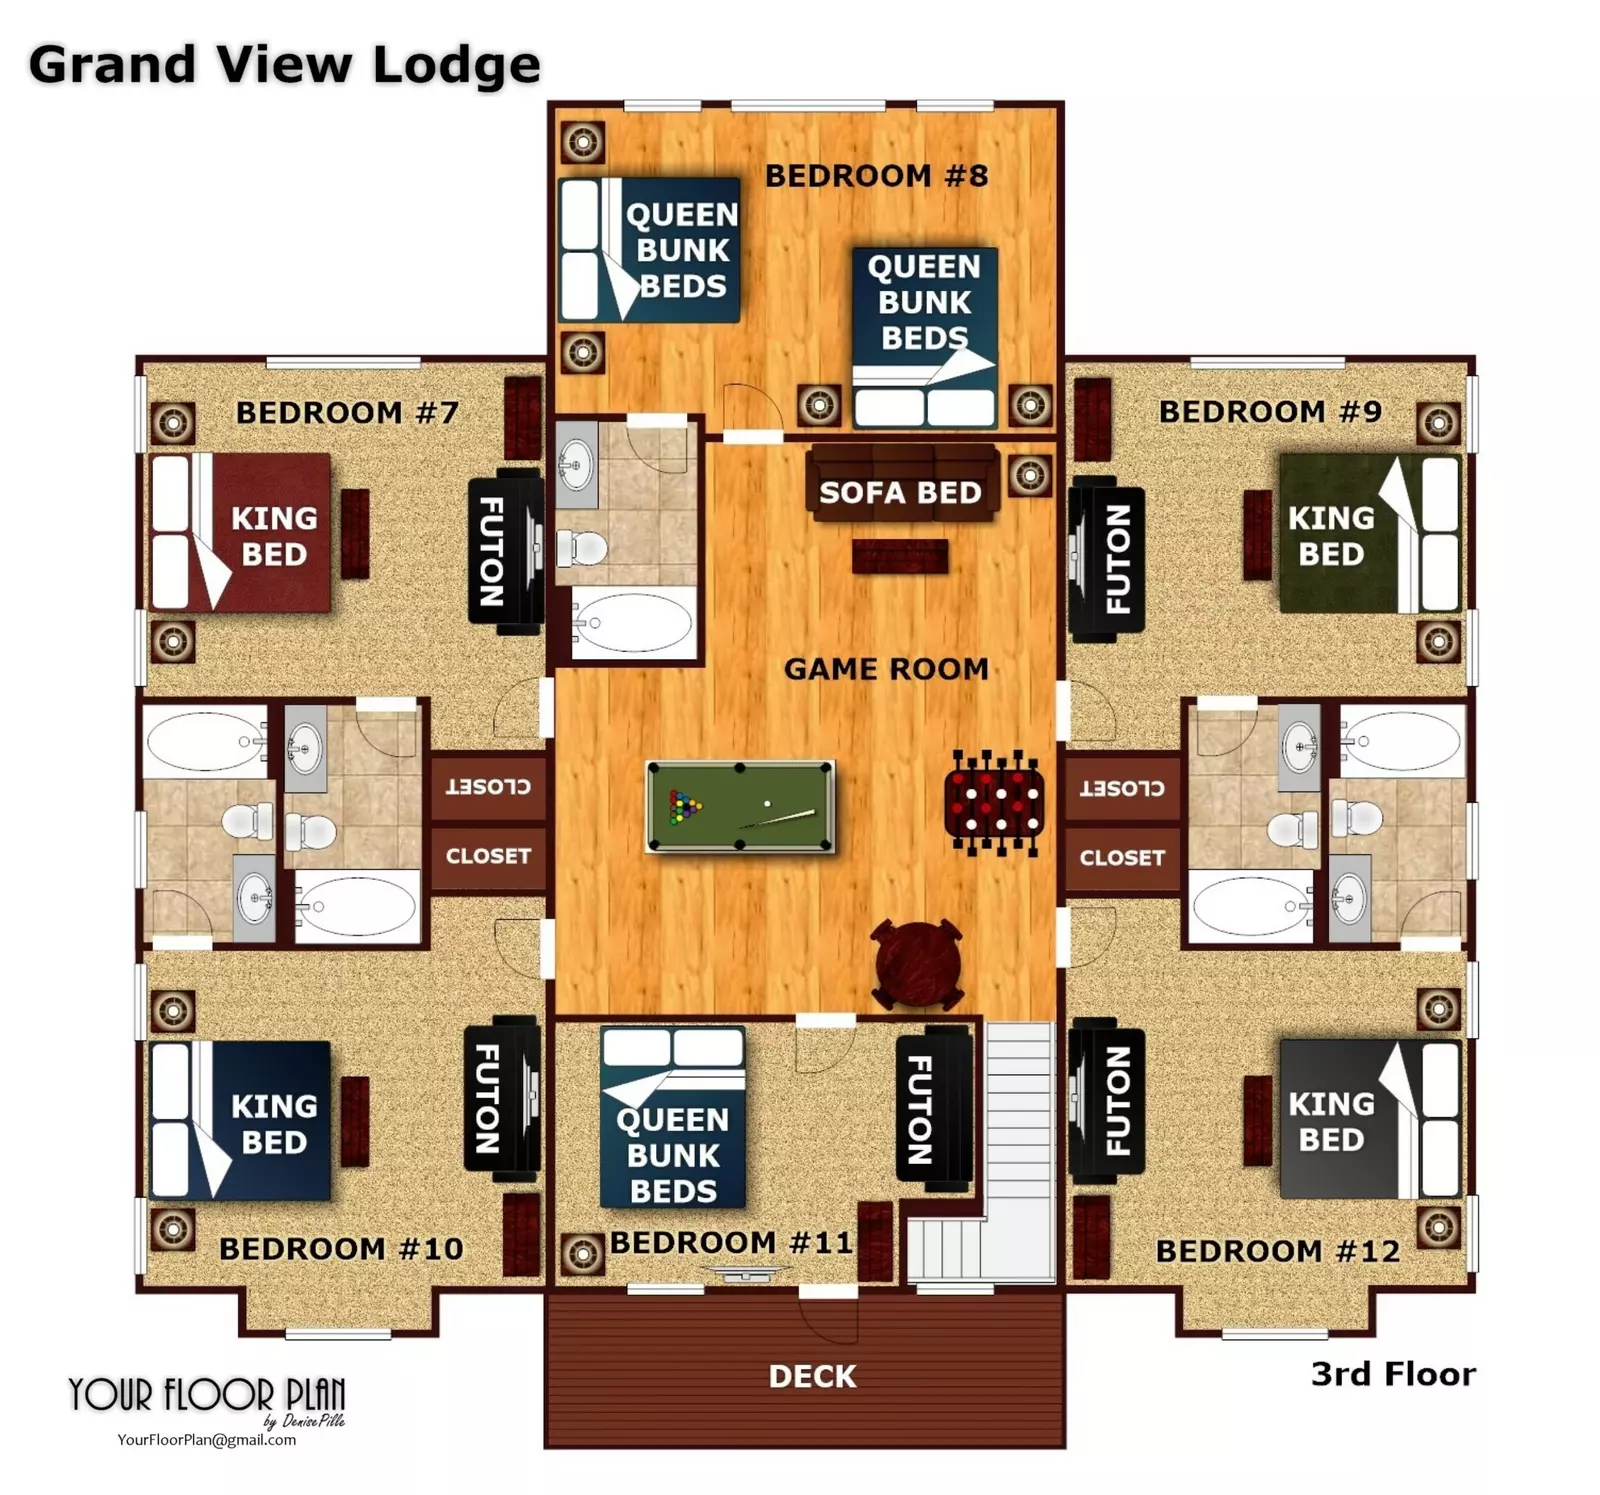 Floor plan of the third floor of Grand View Lodge cabin in Pigeon Forge